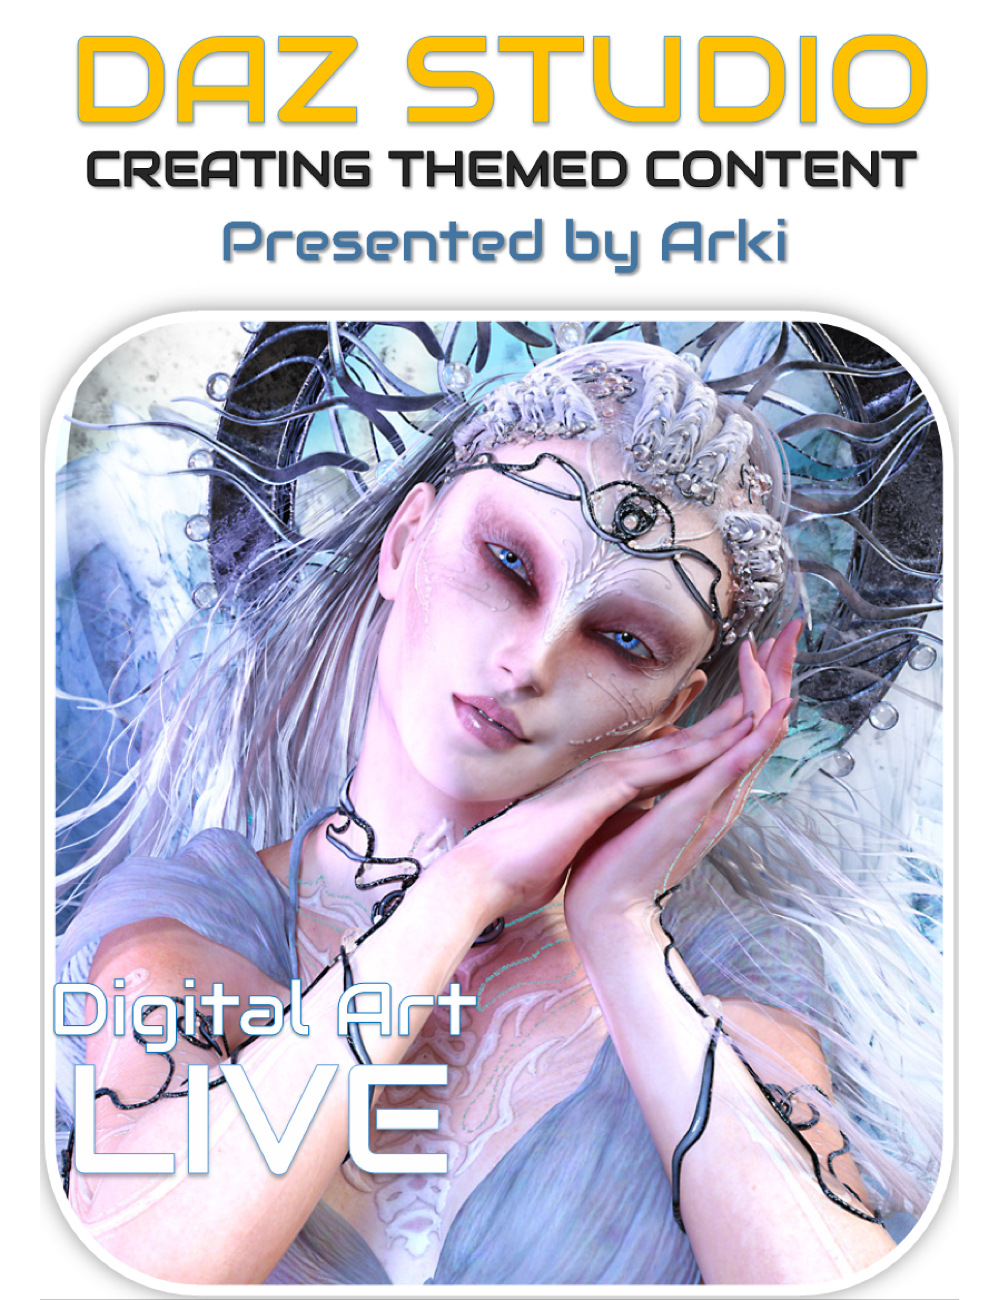 Daz Studio : Creating Themed Content from Concepts to Products by: Digital Art LiveArki, 3D Models by Daz 3D